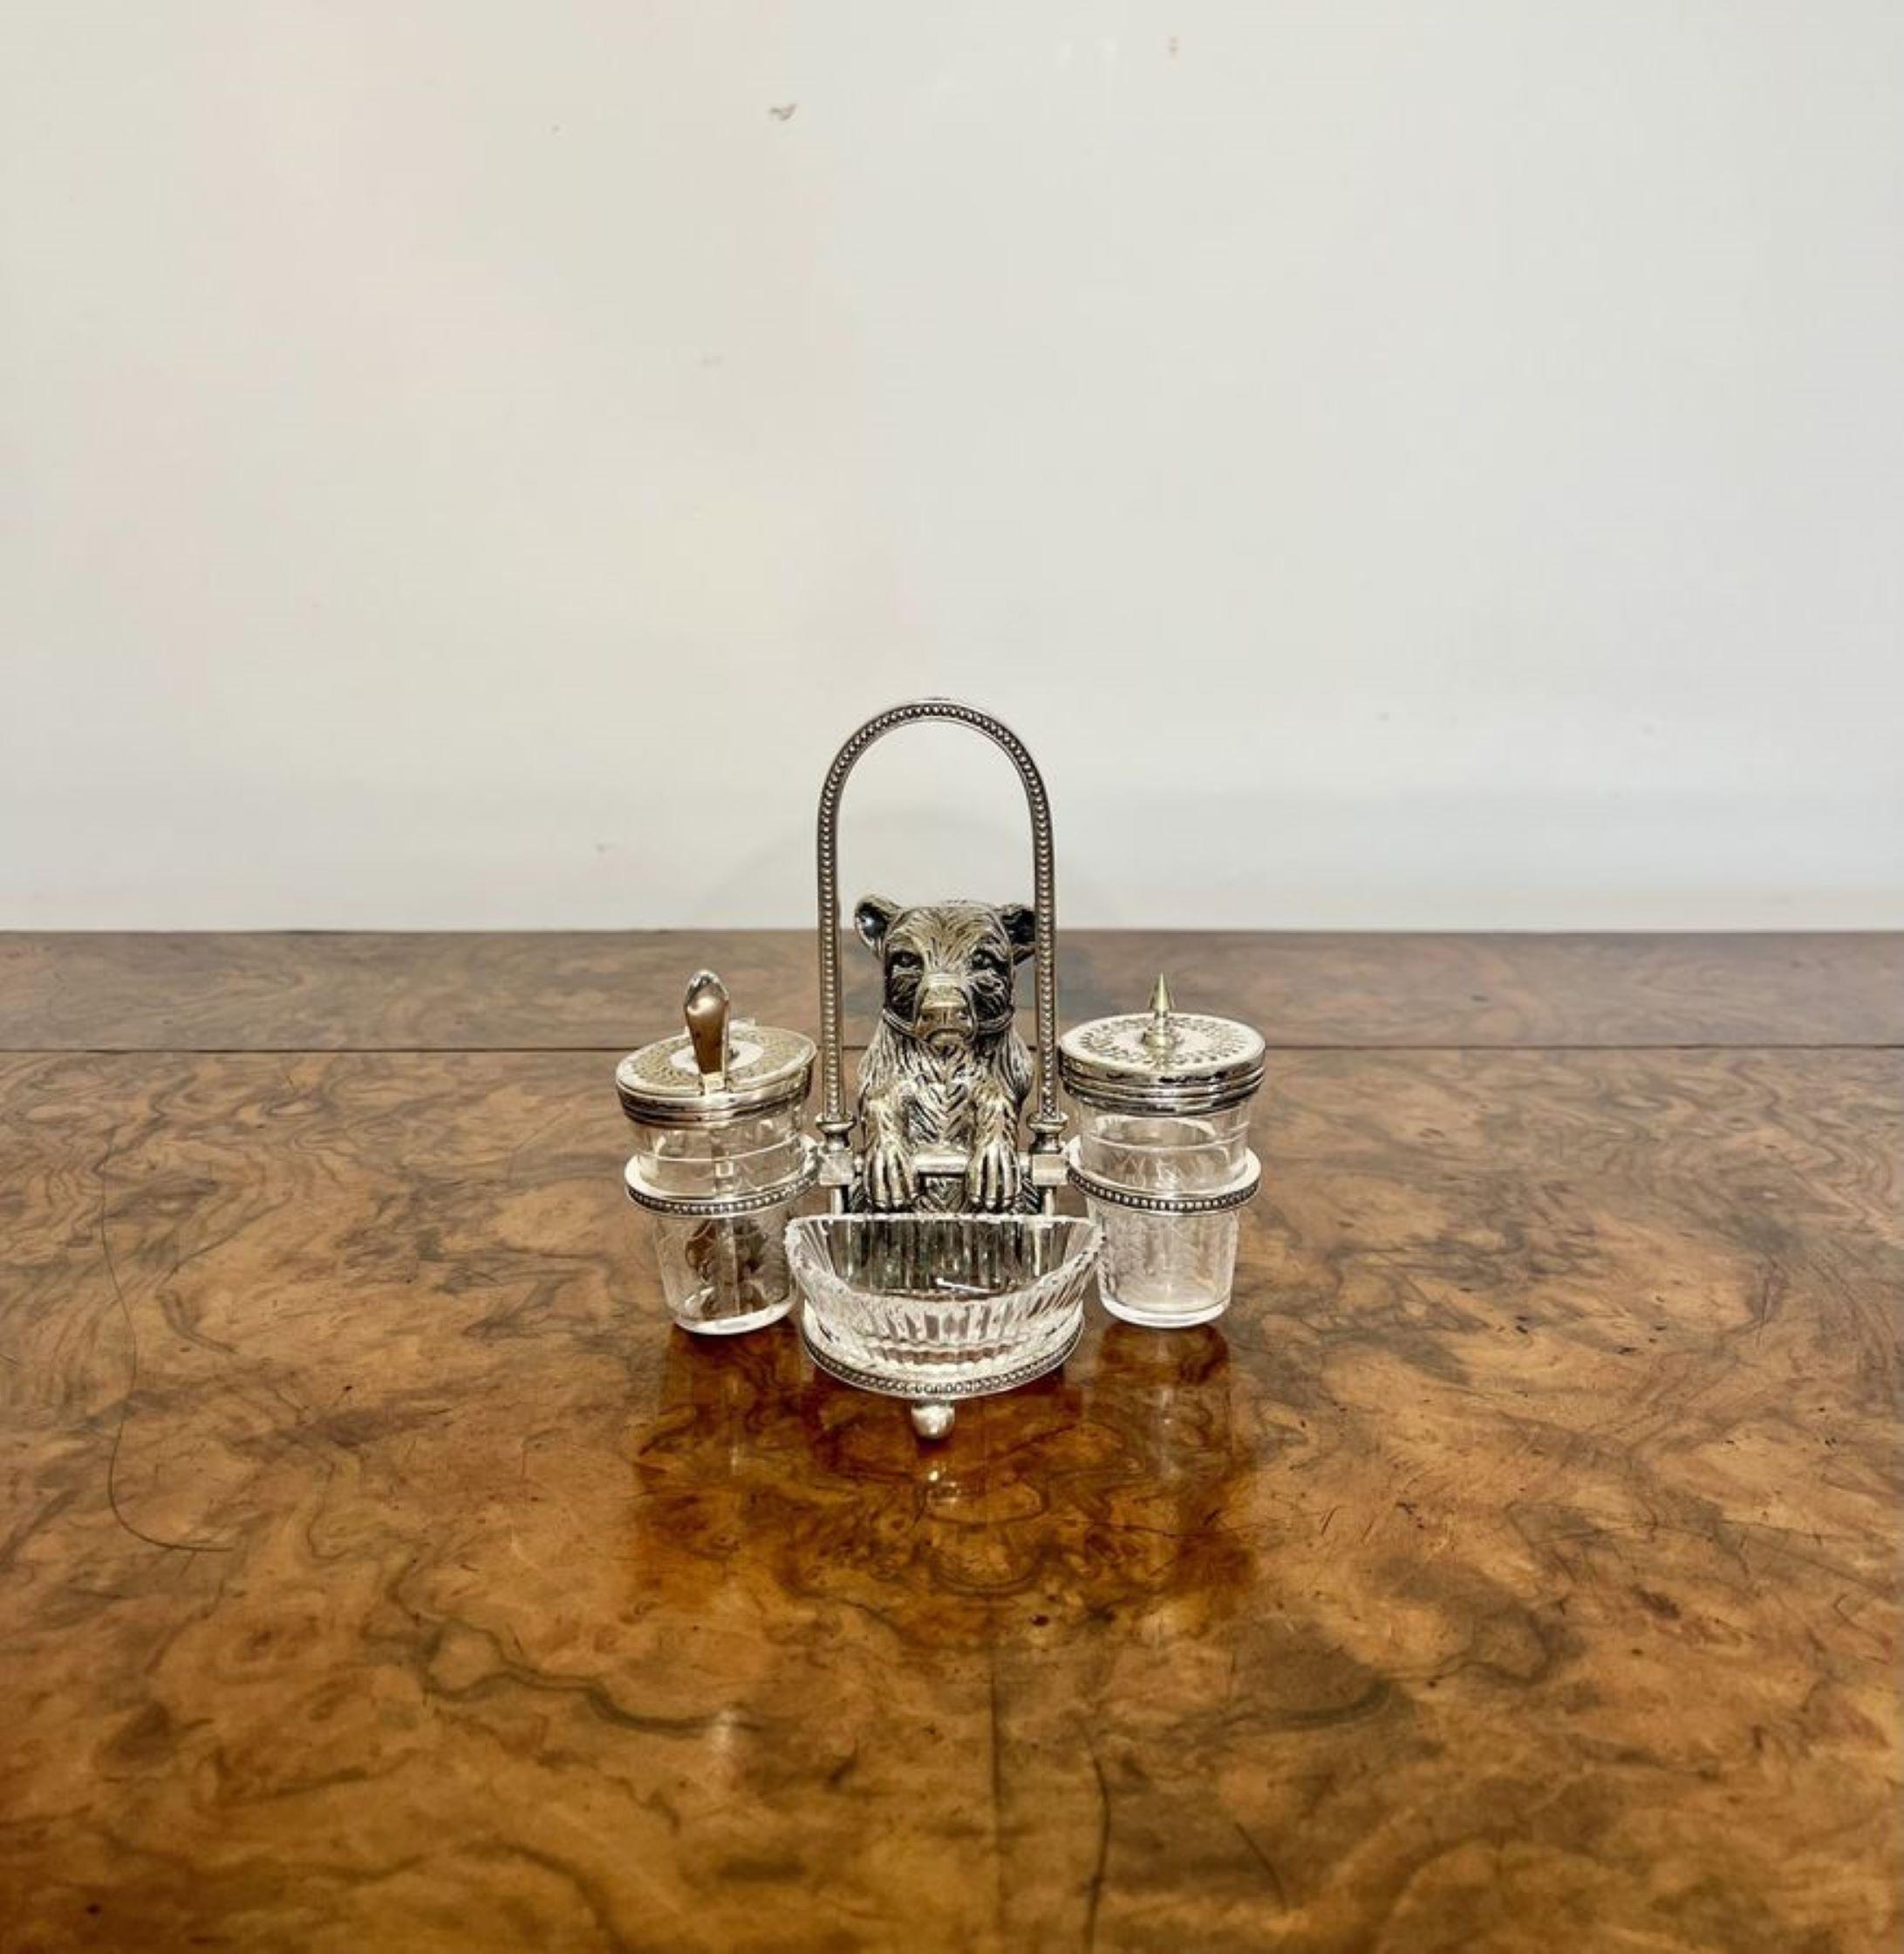 Outstanding quality antique Victorian silver plated novelty cruet having a fantastic quality antique Victorian novelty cruet having a silver plated bear to the middle, next to a silver plated and etched glass mustard pot and spoon and the matching